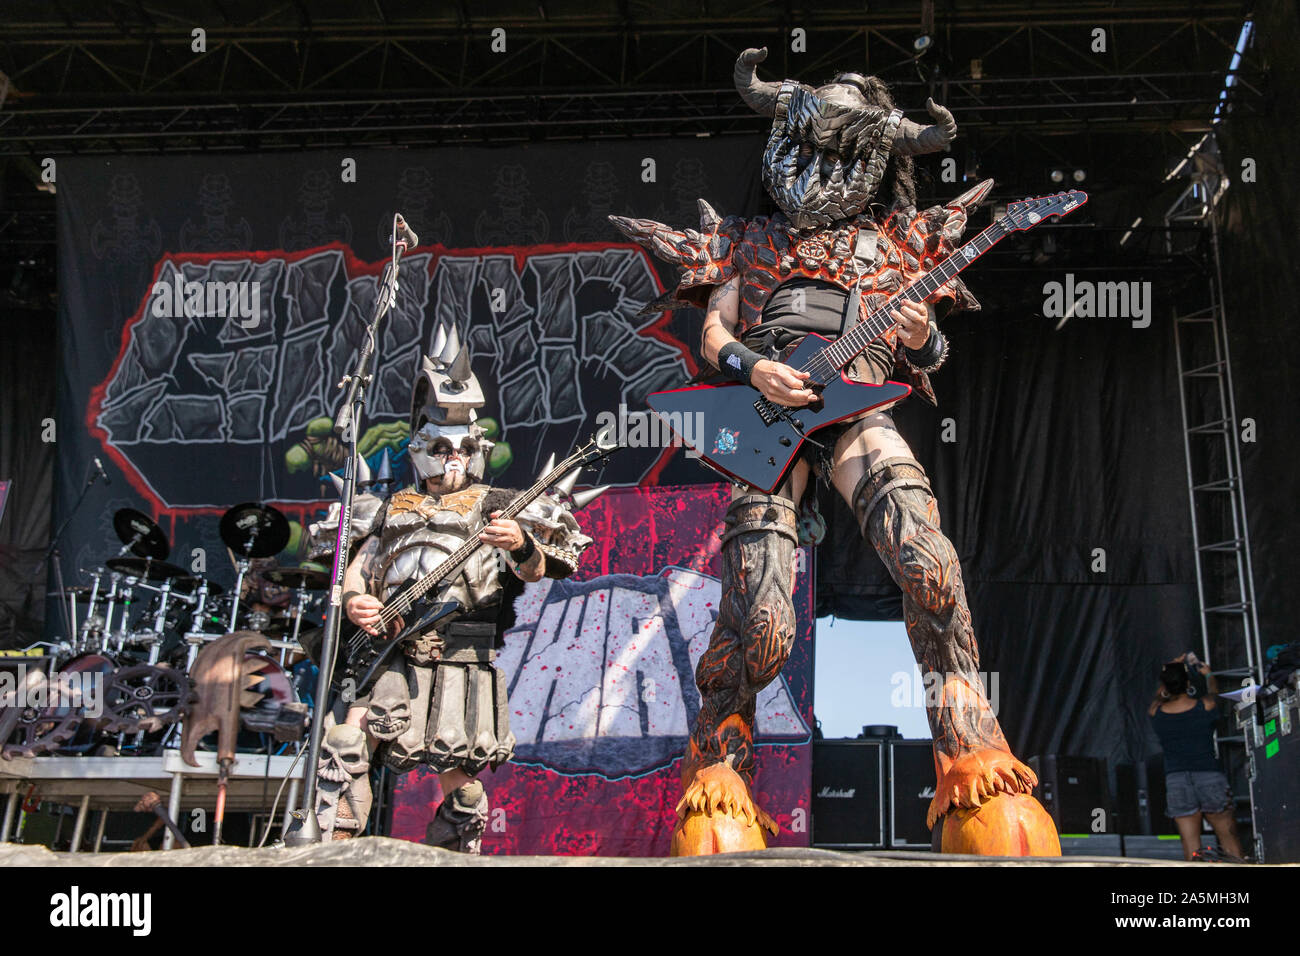 September 14, 2019, Chicago, Illinois, U.S: BEEFCAKE THE MIGHTY (CASEY ORR) and BALSAC THE JAWS OF DEATH (MIKE DERKS) of Gwar during the Riot Fest Music Festival at Douglas Park in Chicago, Illinois (Credit Image: © Daniel DeSlover/ZUMA Wire) Stock Photo